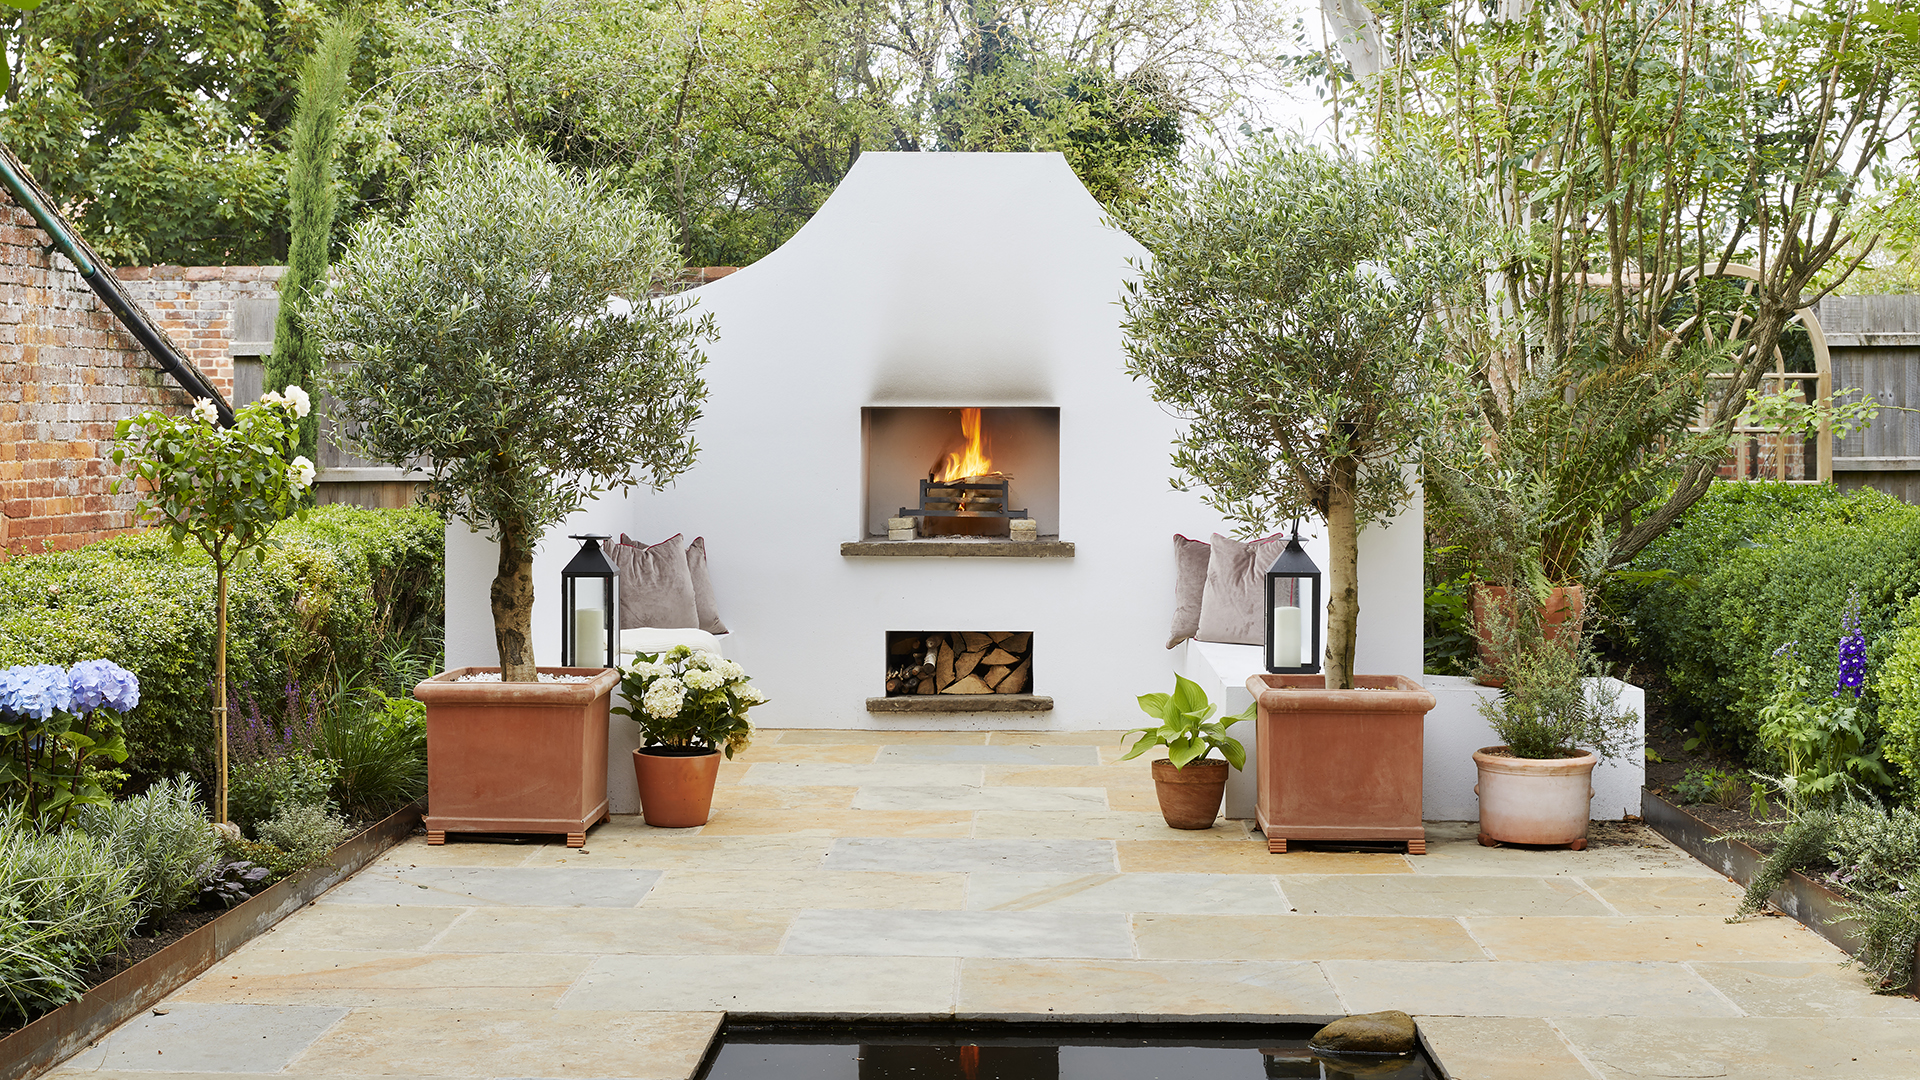 Olive trees in pots in mediterranean-style outdoor living area